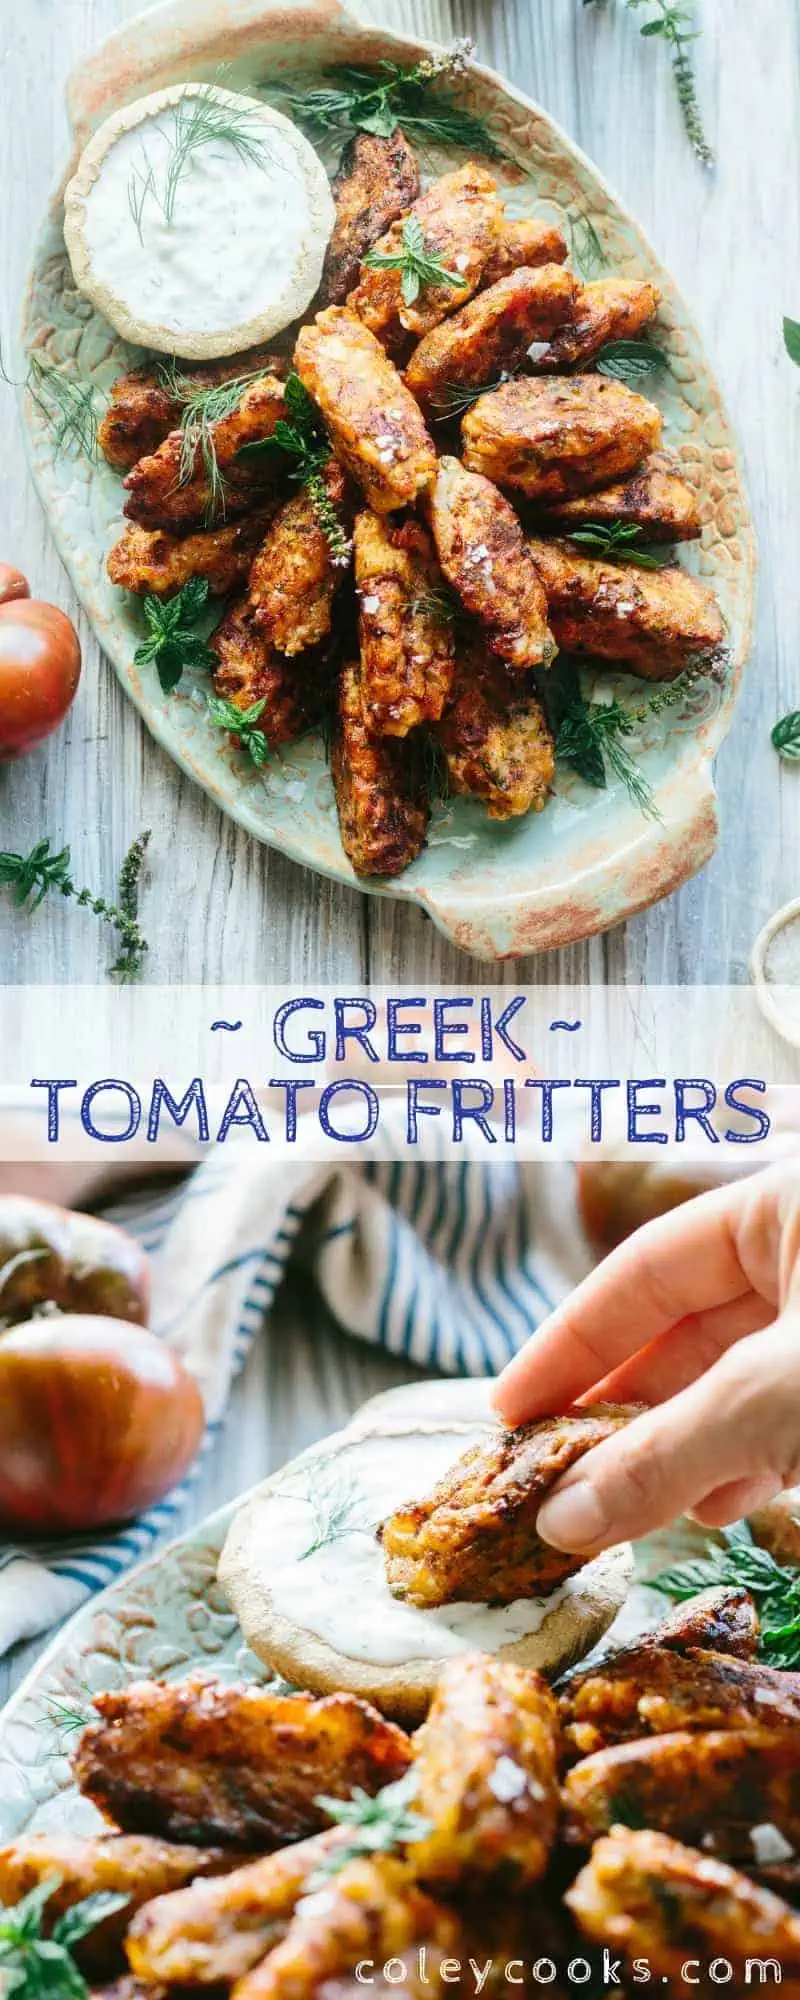 Vertical Pinterest collage of a platter of Greek tomato fritters plus a hand dipping one in tzatziki.